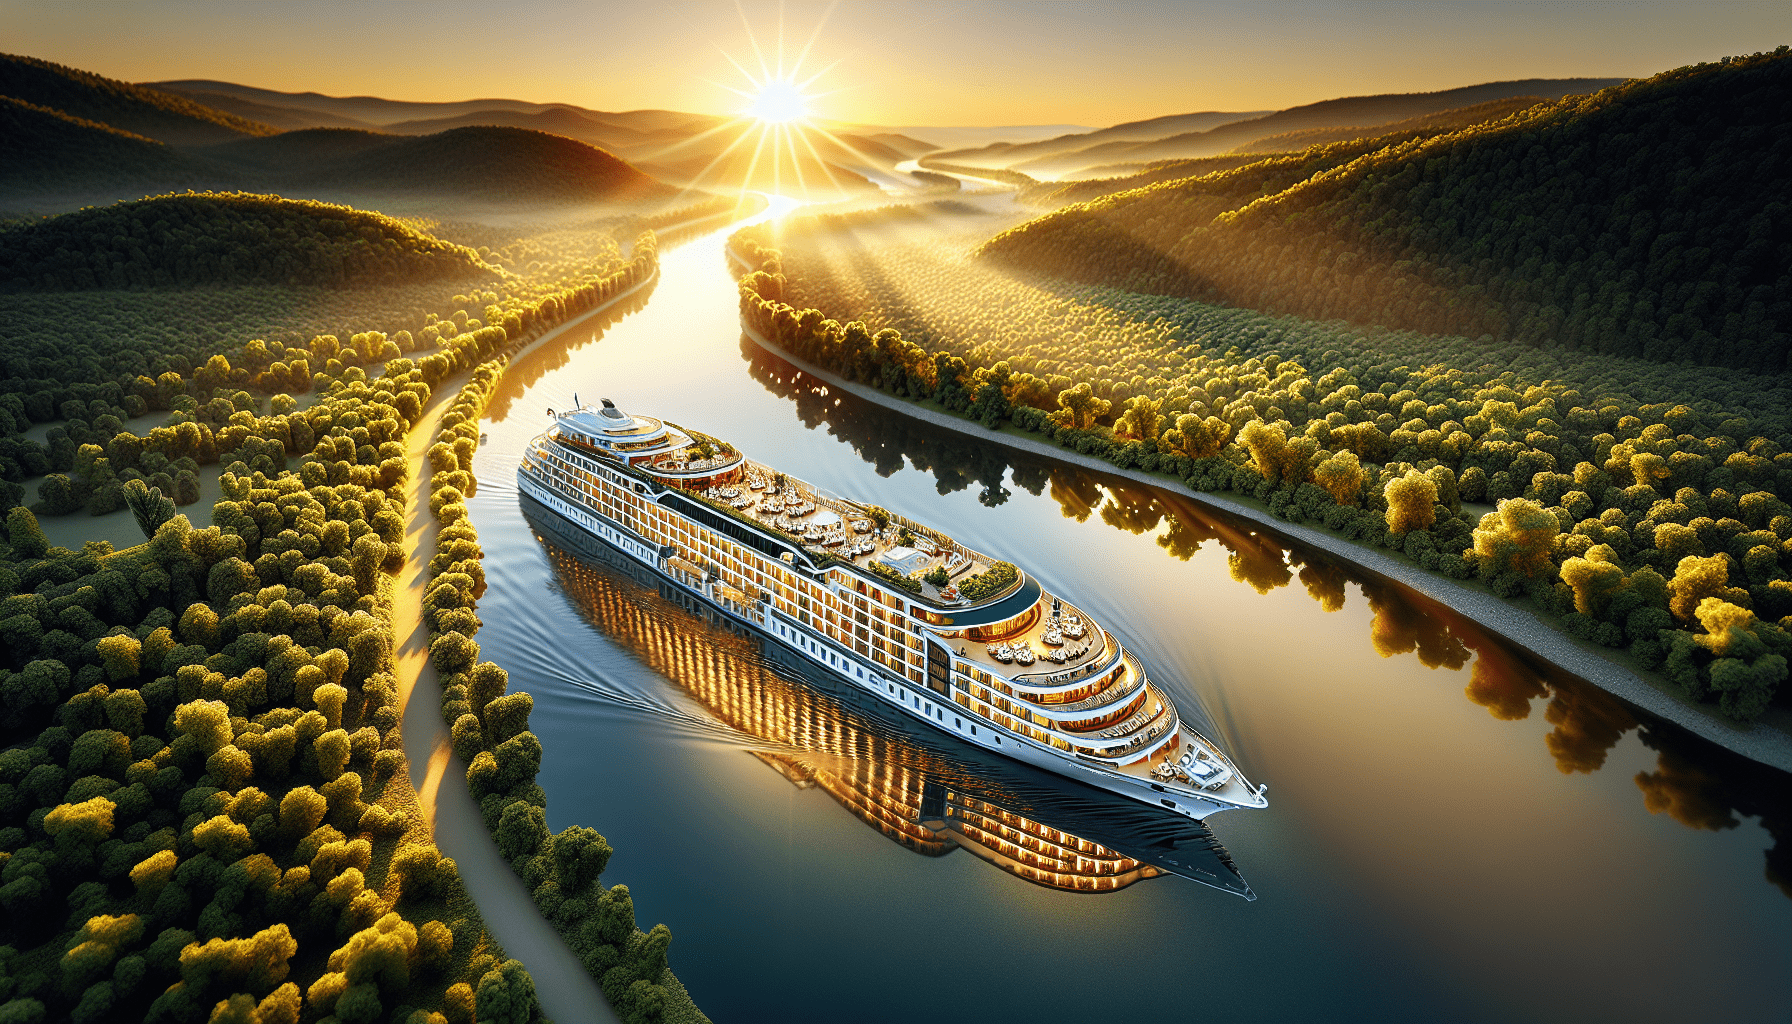 What Is The Cost Of The Largest River Cruise Ticket?